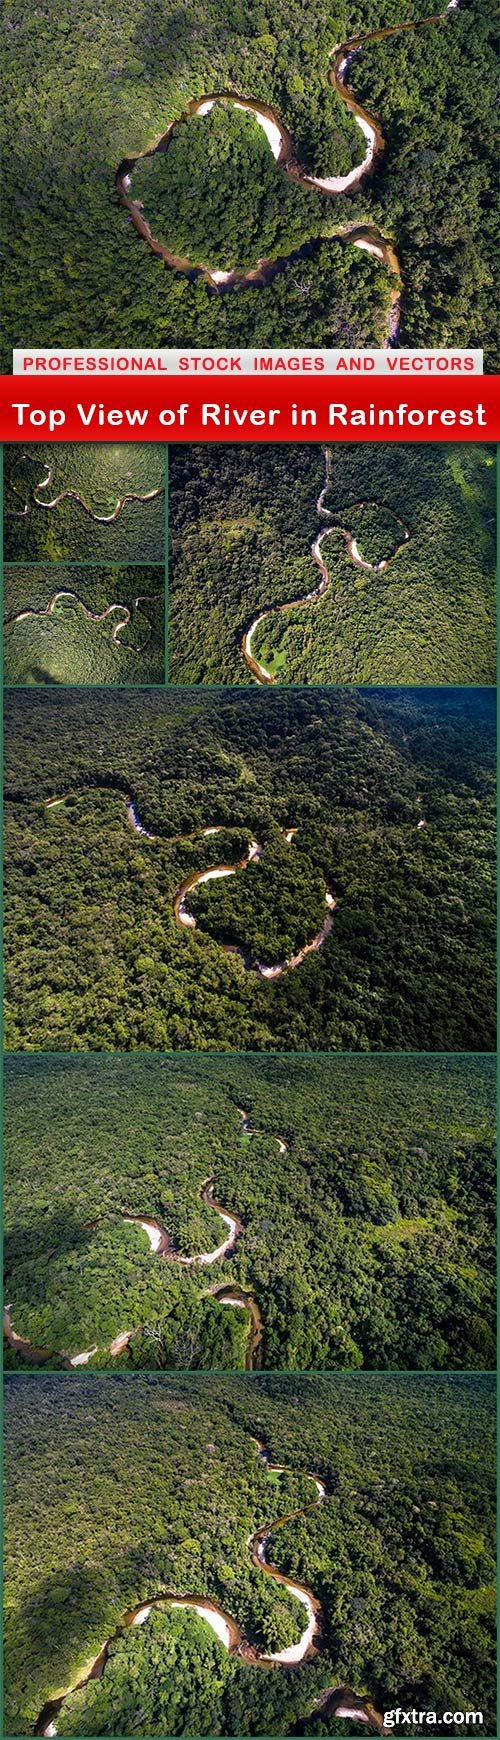 Top View of River in Rainforest - 7 UHQ JPEG